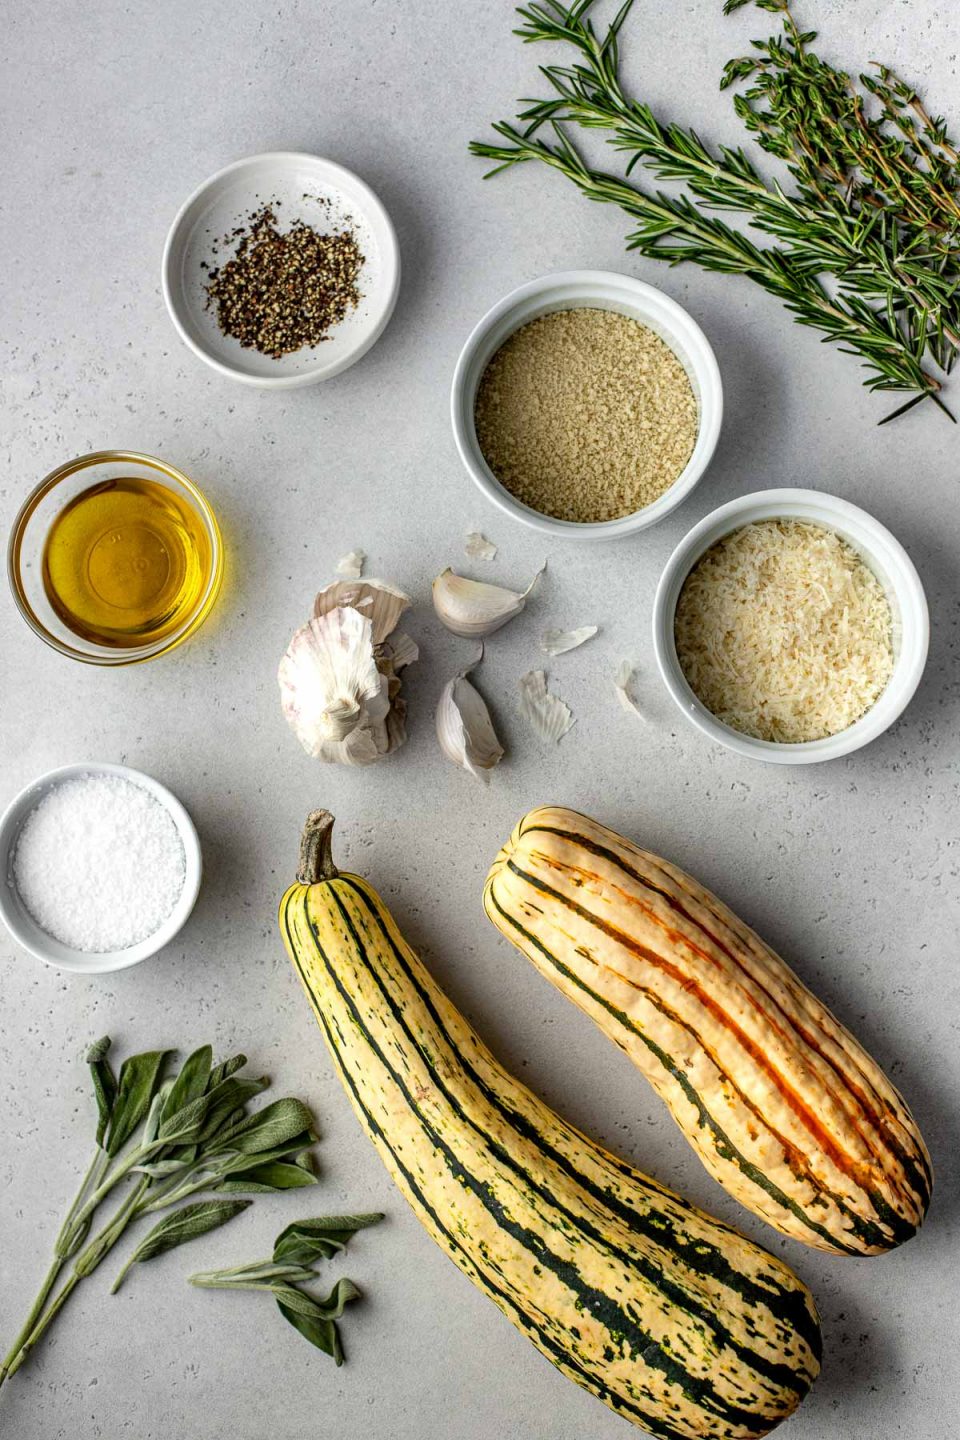 Parmesan Crusted Roasted Delicata Squash ingredients arranged on a creamy white textured surface: delicata squash, garlic, fresh herbs - rosemary, sage, and thyme, olive oil, kosher salt, ground black pepper, panko breadcrumbs, and parmesan cheese.